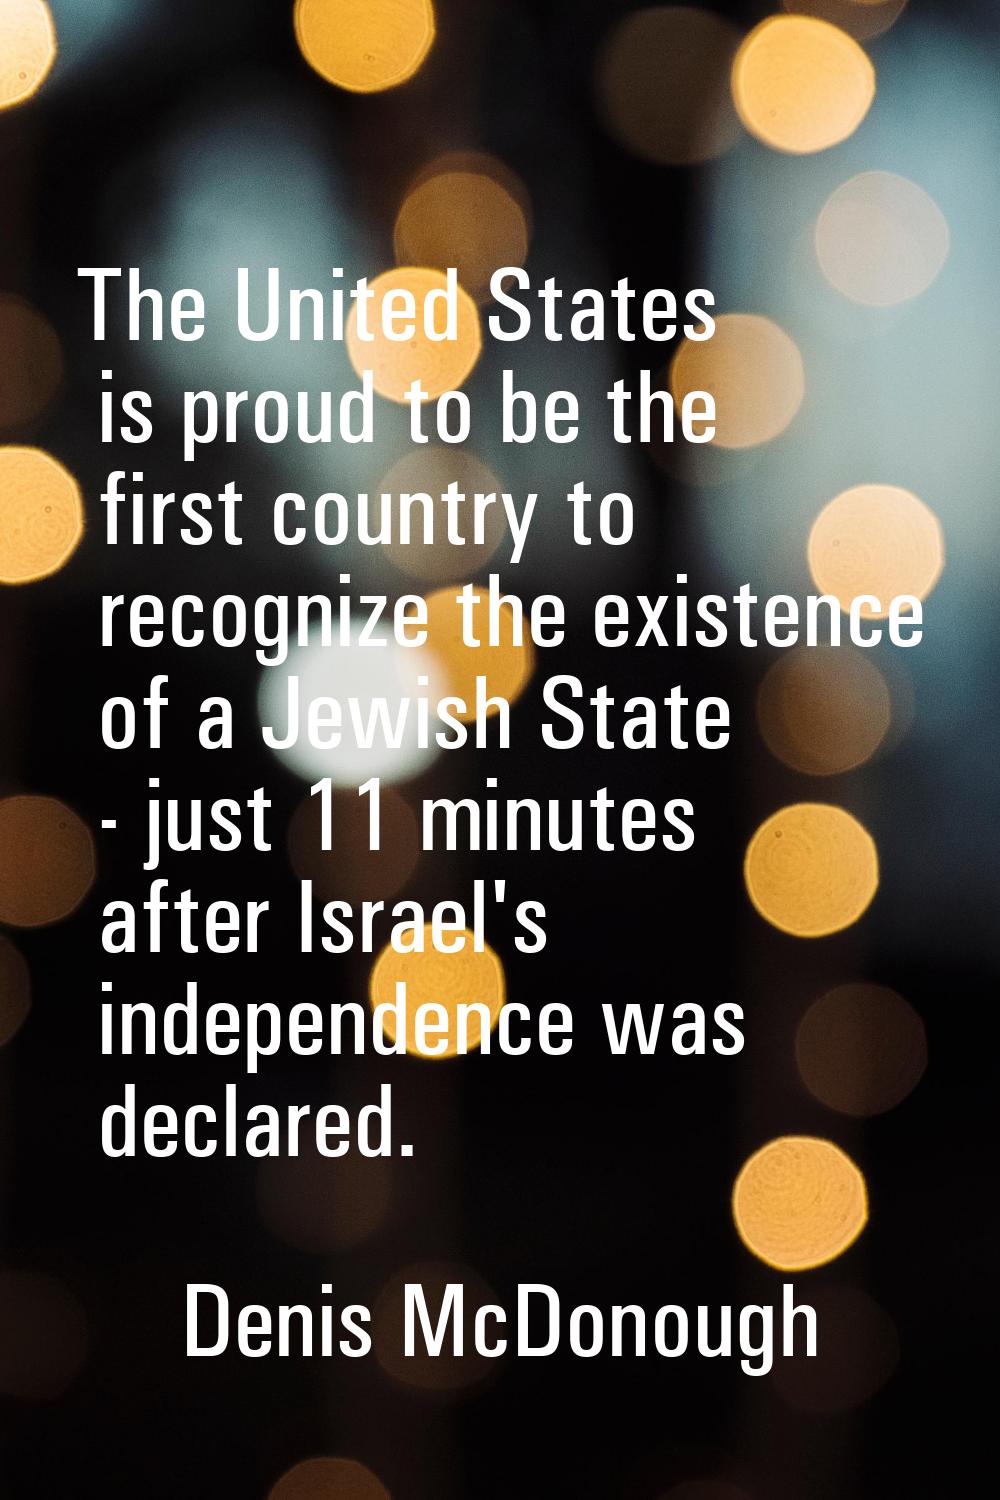 The United States is proud to be the first country to recognize the existence of a Jewish State - j